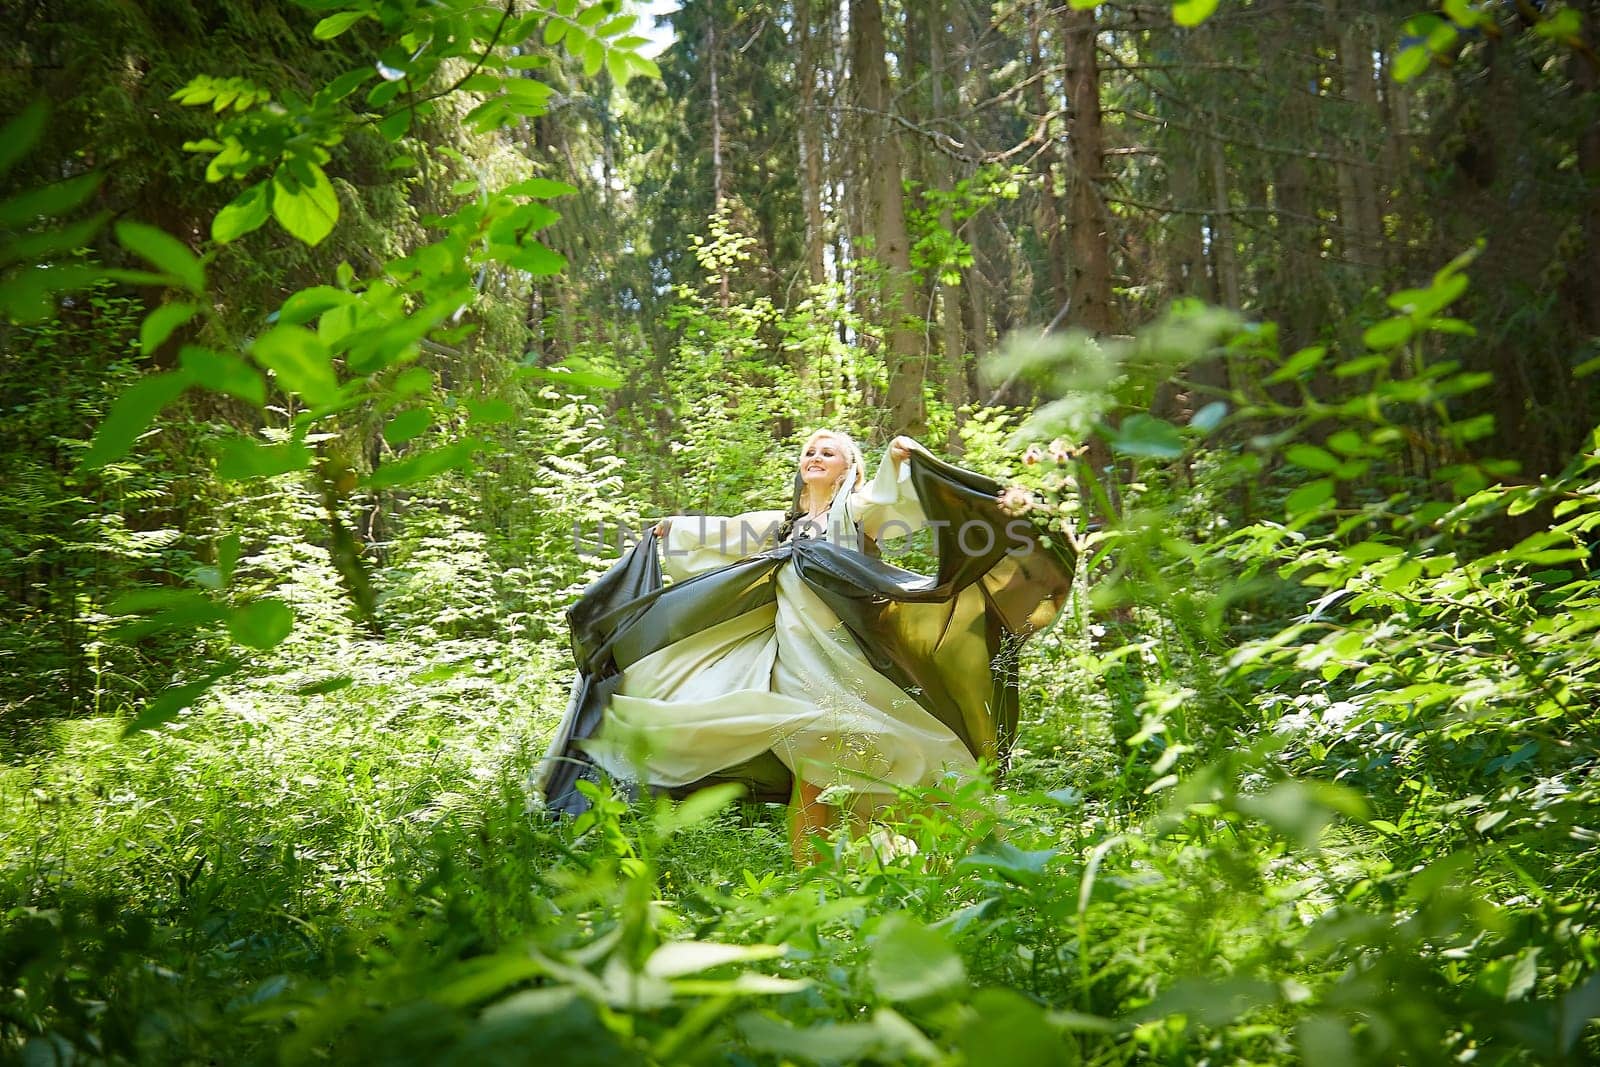 Adult mature woman 40-60 in a green long fairy dress in forest. Photo shoot in style of dryad and queen of nature. Fairy in beautiful green summer forest. Concept of caring for nature